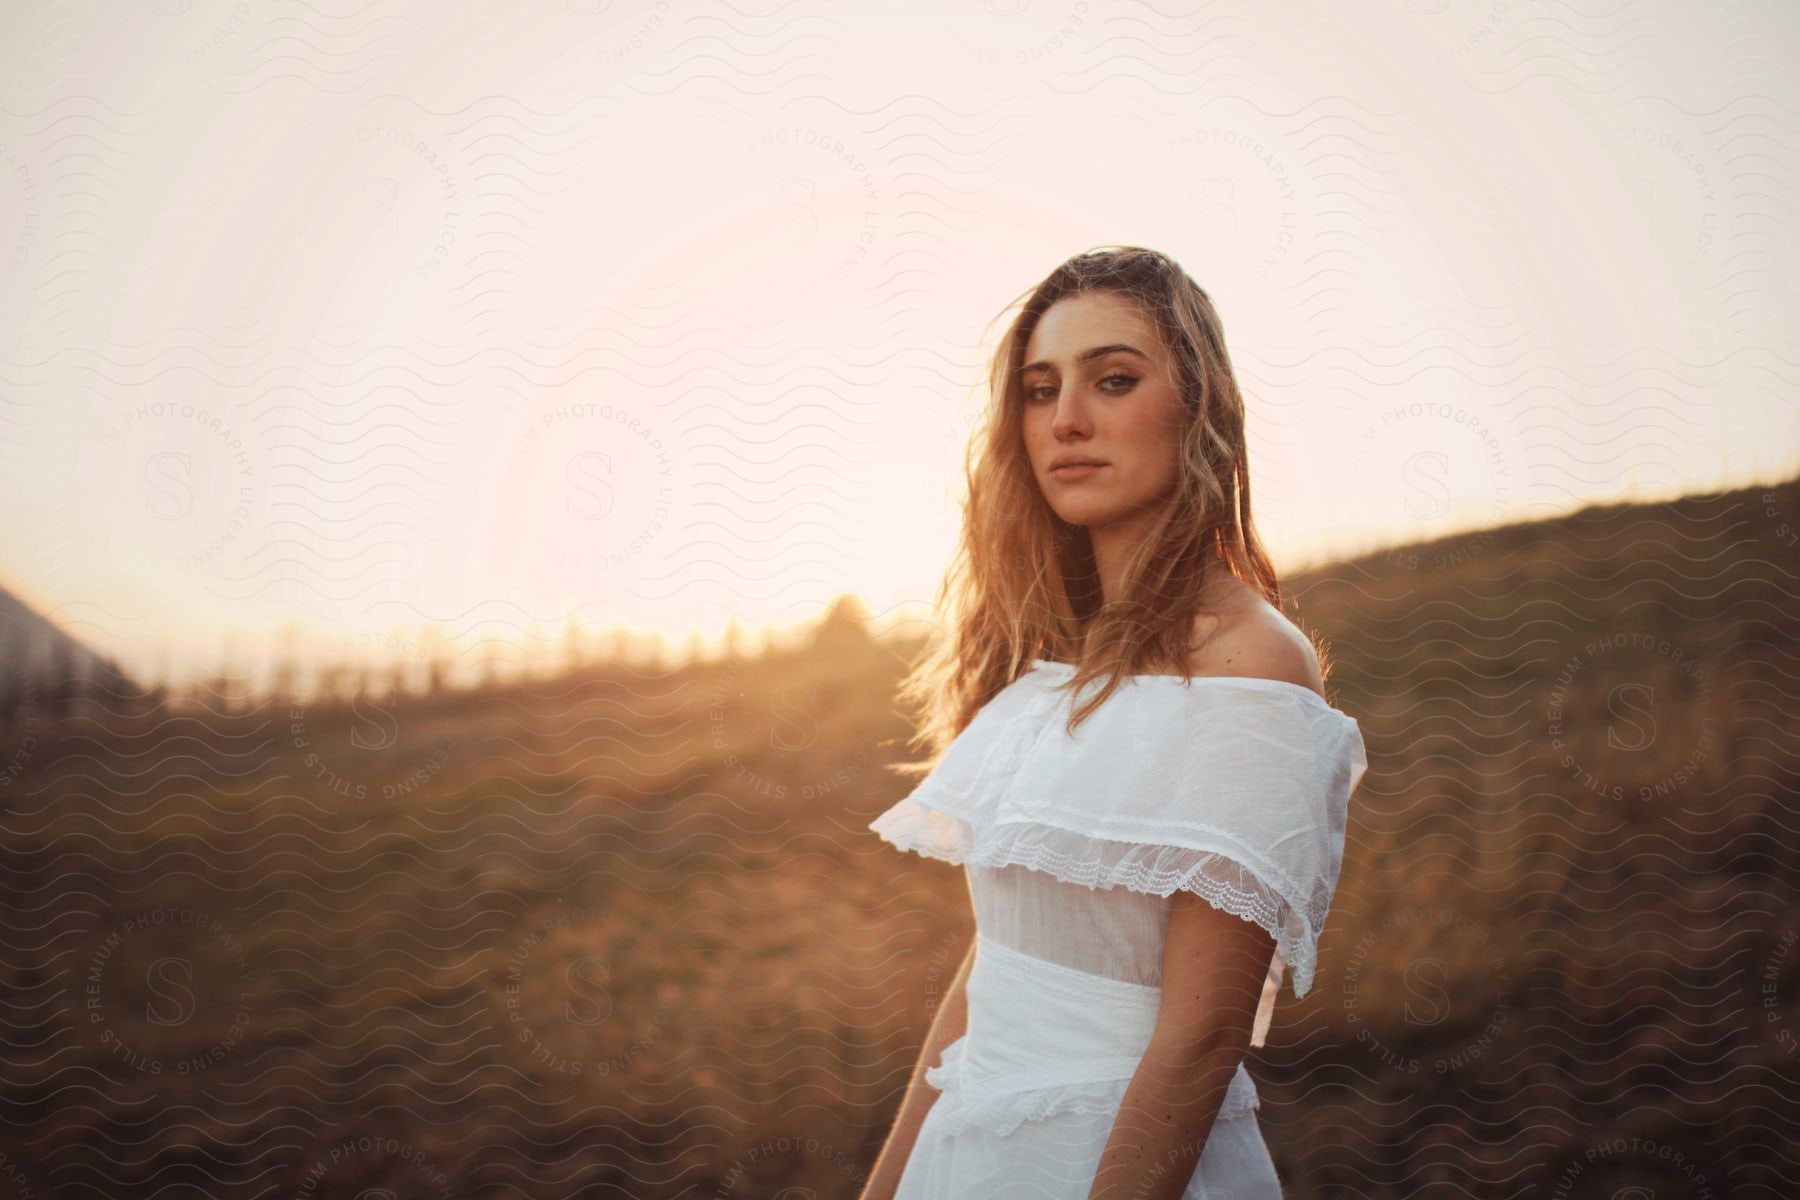 A woman standing on a grassy hill in a white dress